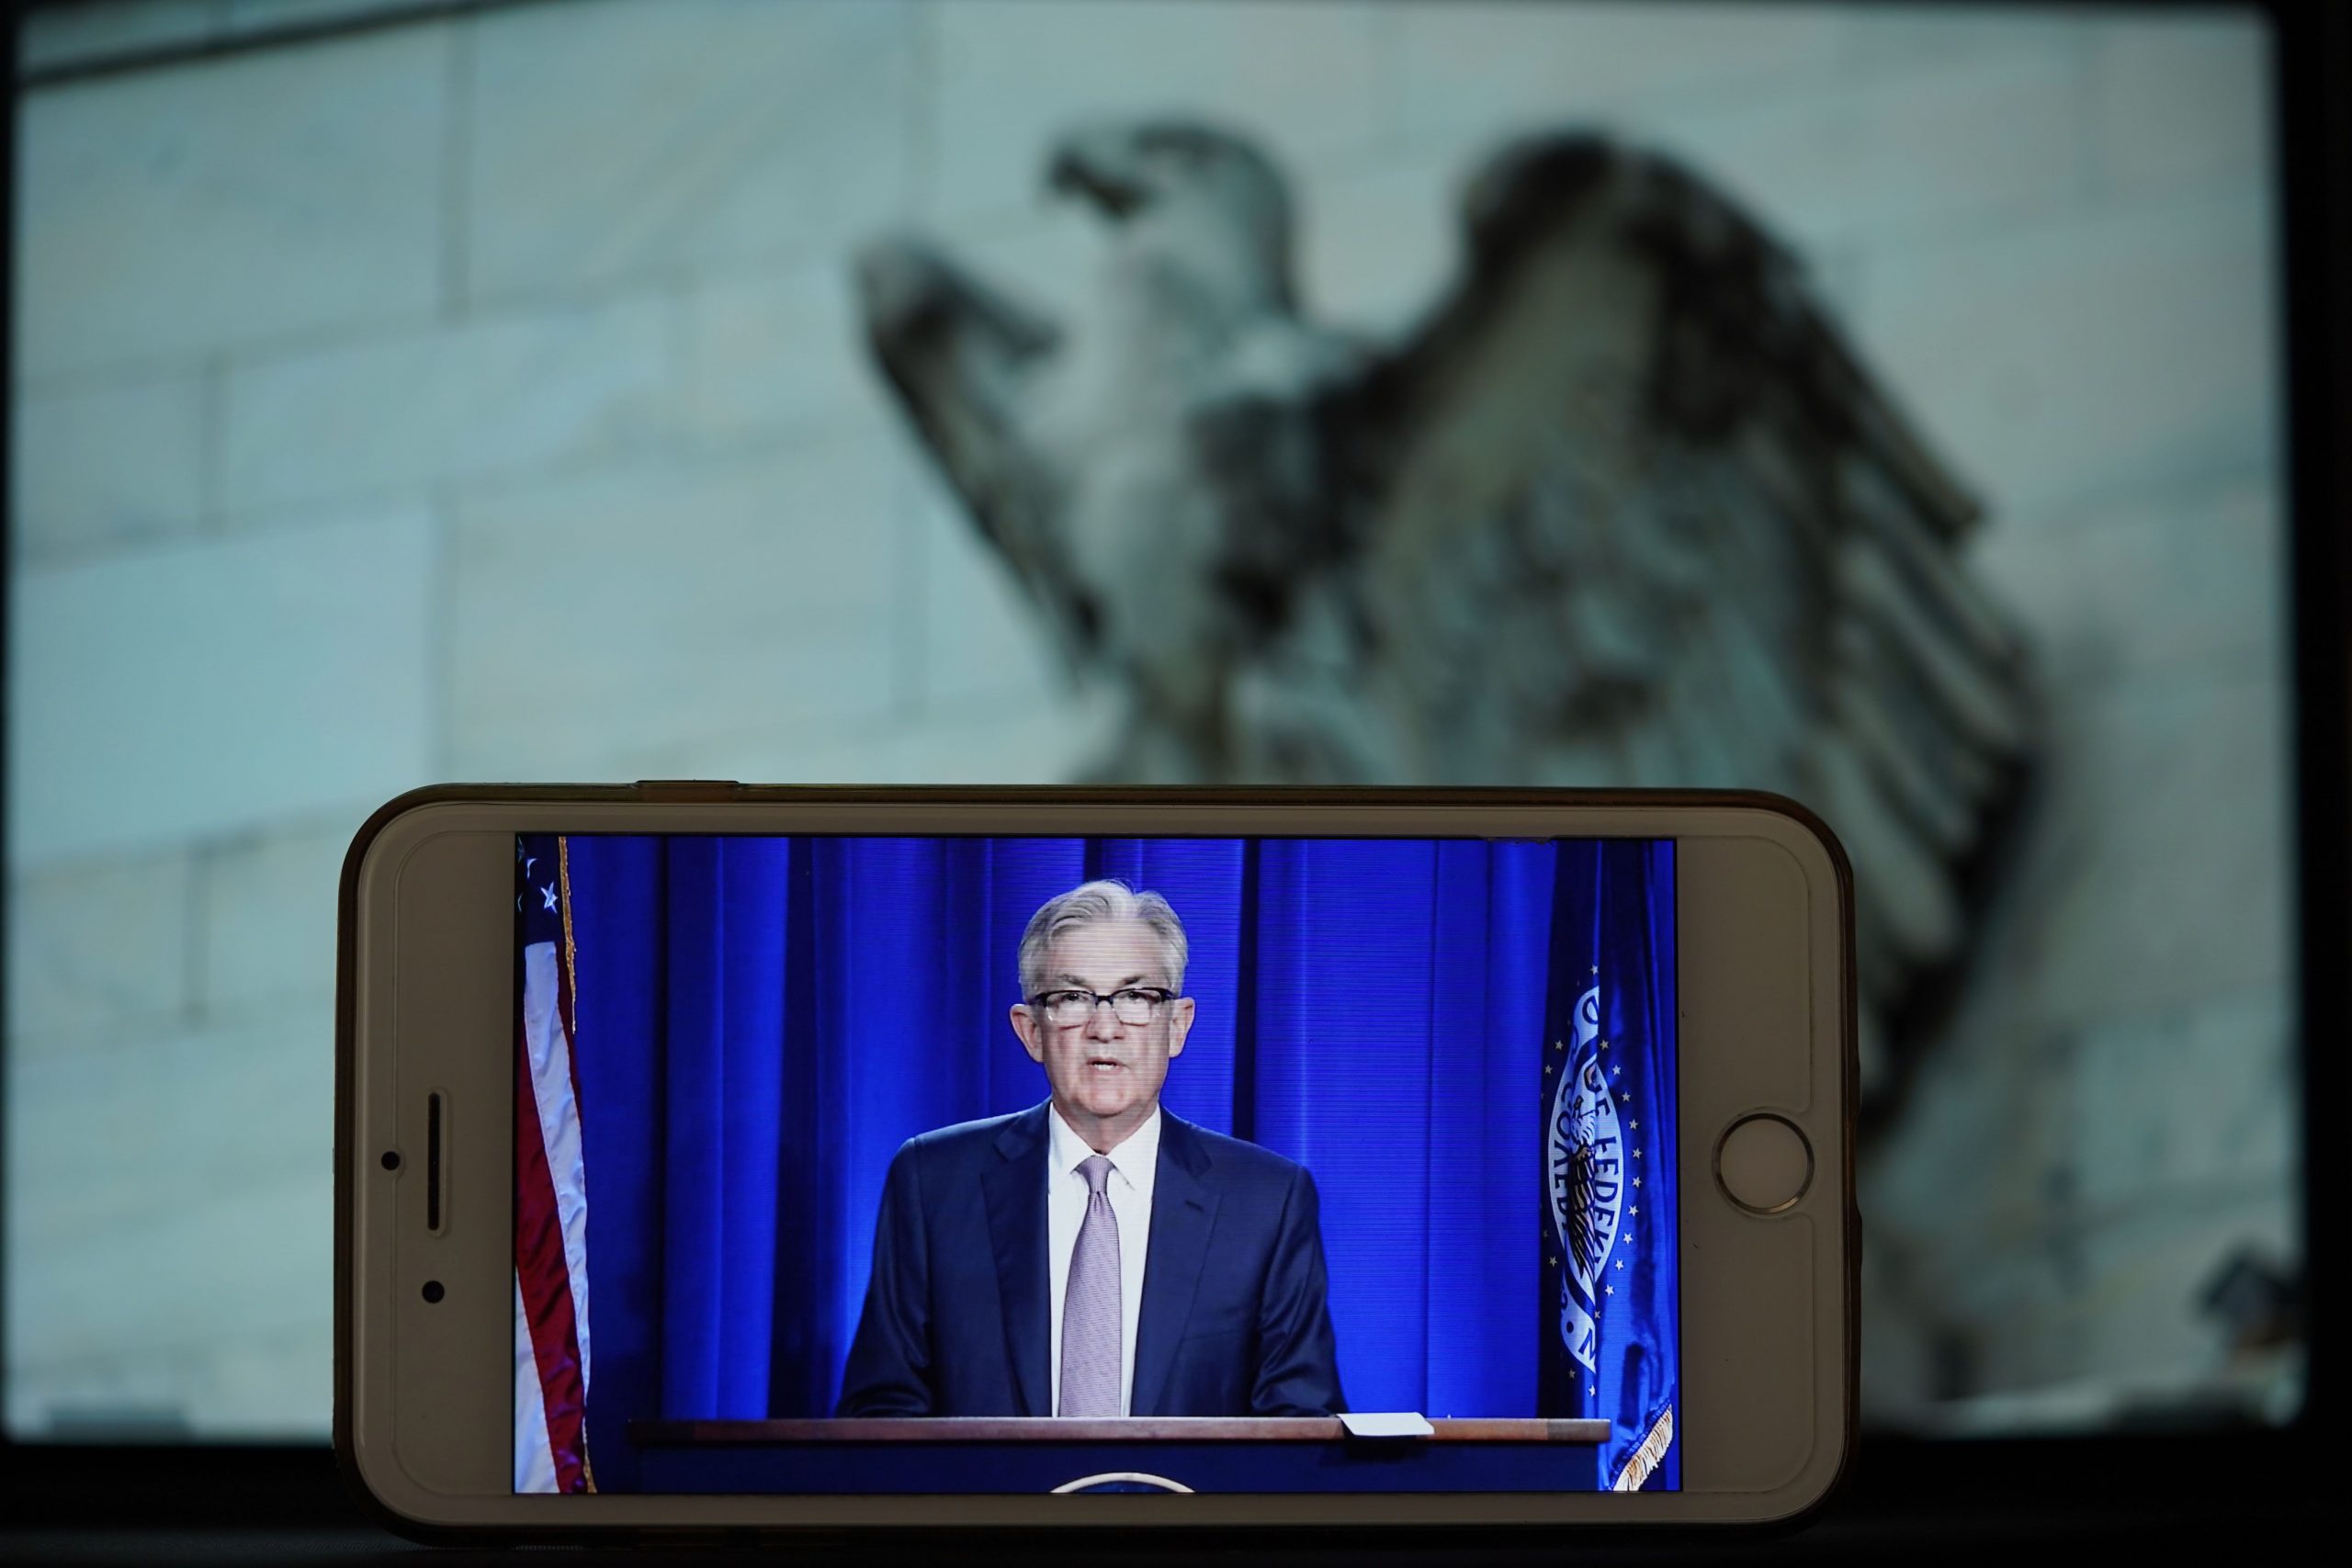 WASHINGTON, June 10, 2020 -- Photo taken on June 10, 2020 shows the live broadcast of U.S. Federal Reserve Chairman Jerome Powell's address during a press conference in Washington D.C., the United States. The U.S. Federal Reserve on Wednesday kept its benchmark interest rate unchanged at the record-low level of near zero amid mounting fallout from the COVID-19-induced recession, and projected interest rates to remain at the current level through at least 2022. (Photo by Liu Jie/Xinhua via Getty) (Xinhua/Liu Jie via Getty Images)